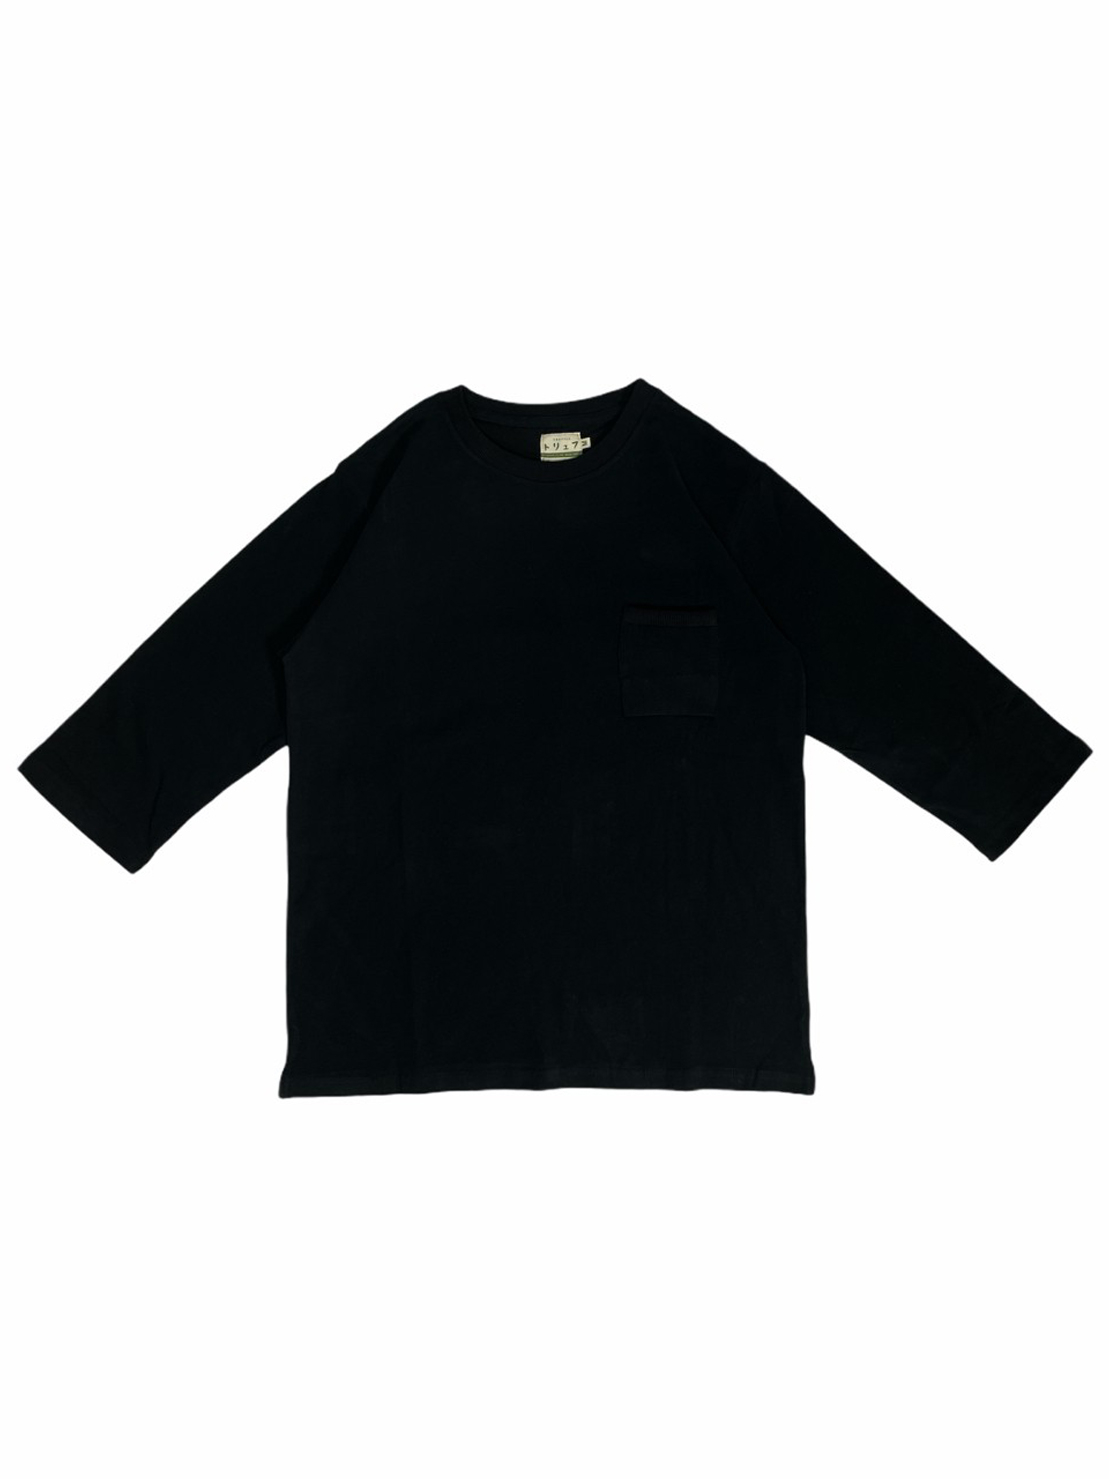 Relaxed Pocket Tee (Black)